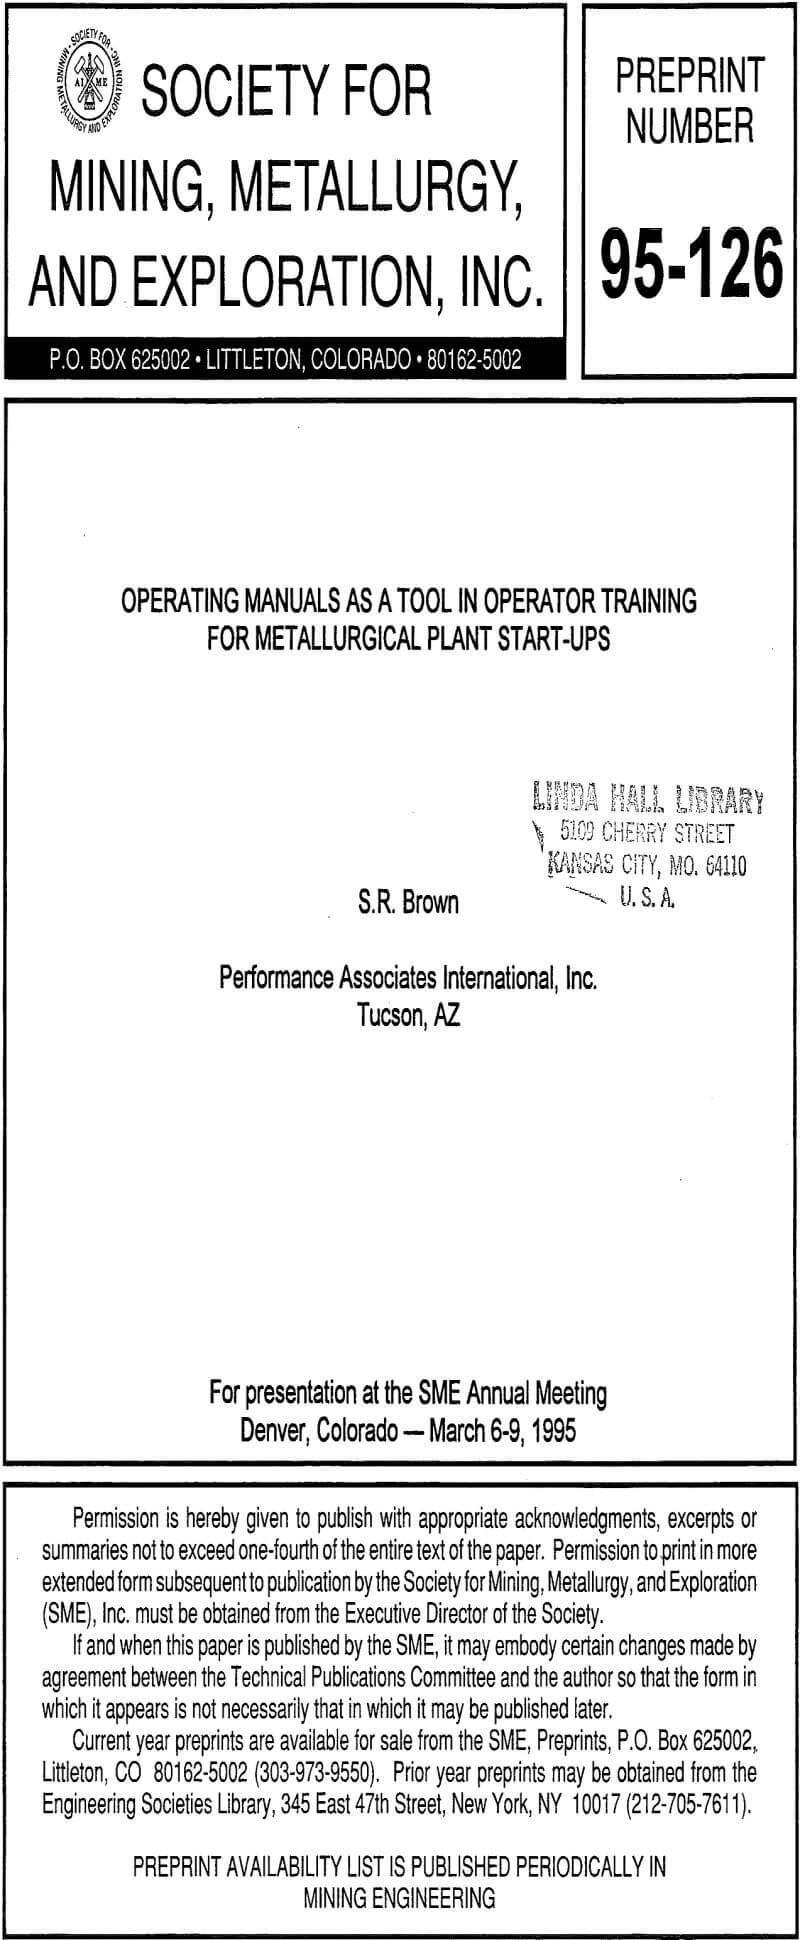 operating manuals as a tool in operator training for metallurgical plant start-ups